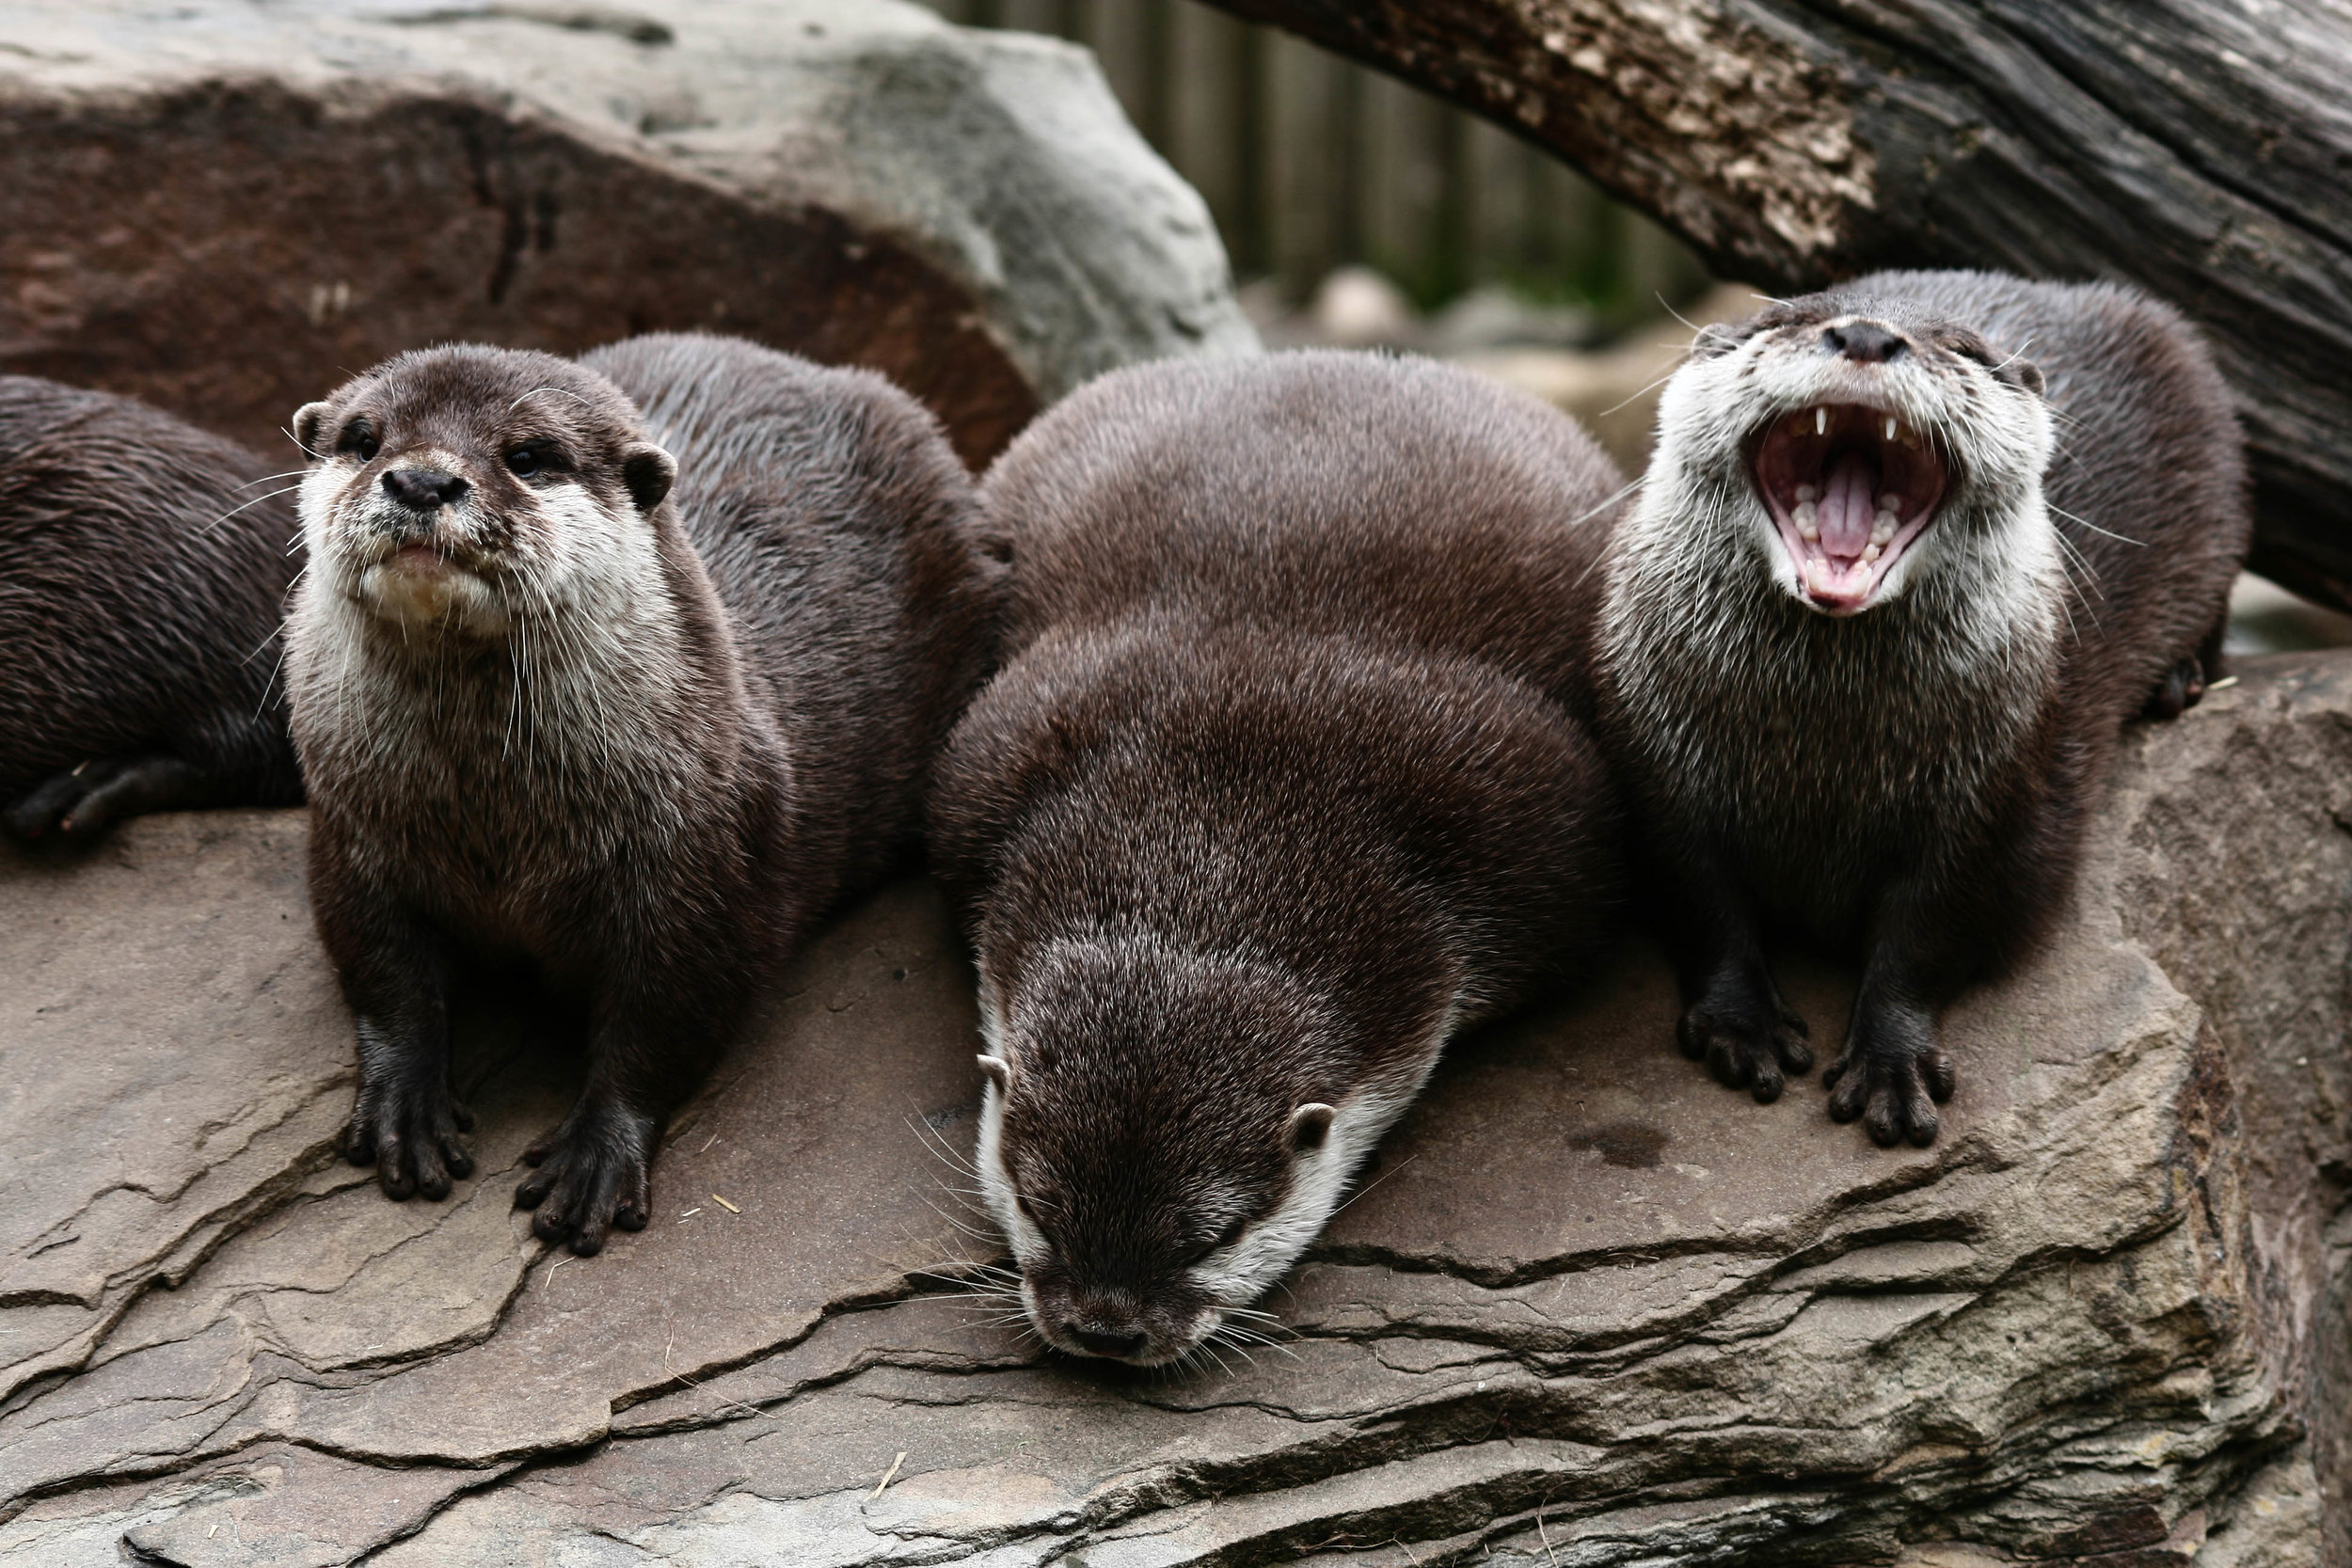 Otter Is the Only One Laughing at His Joke